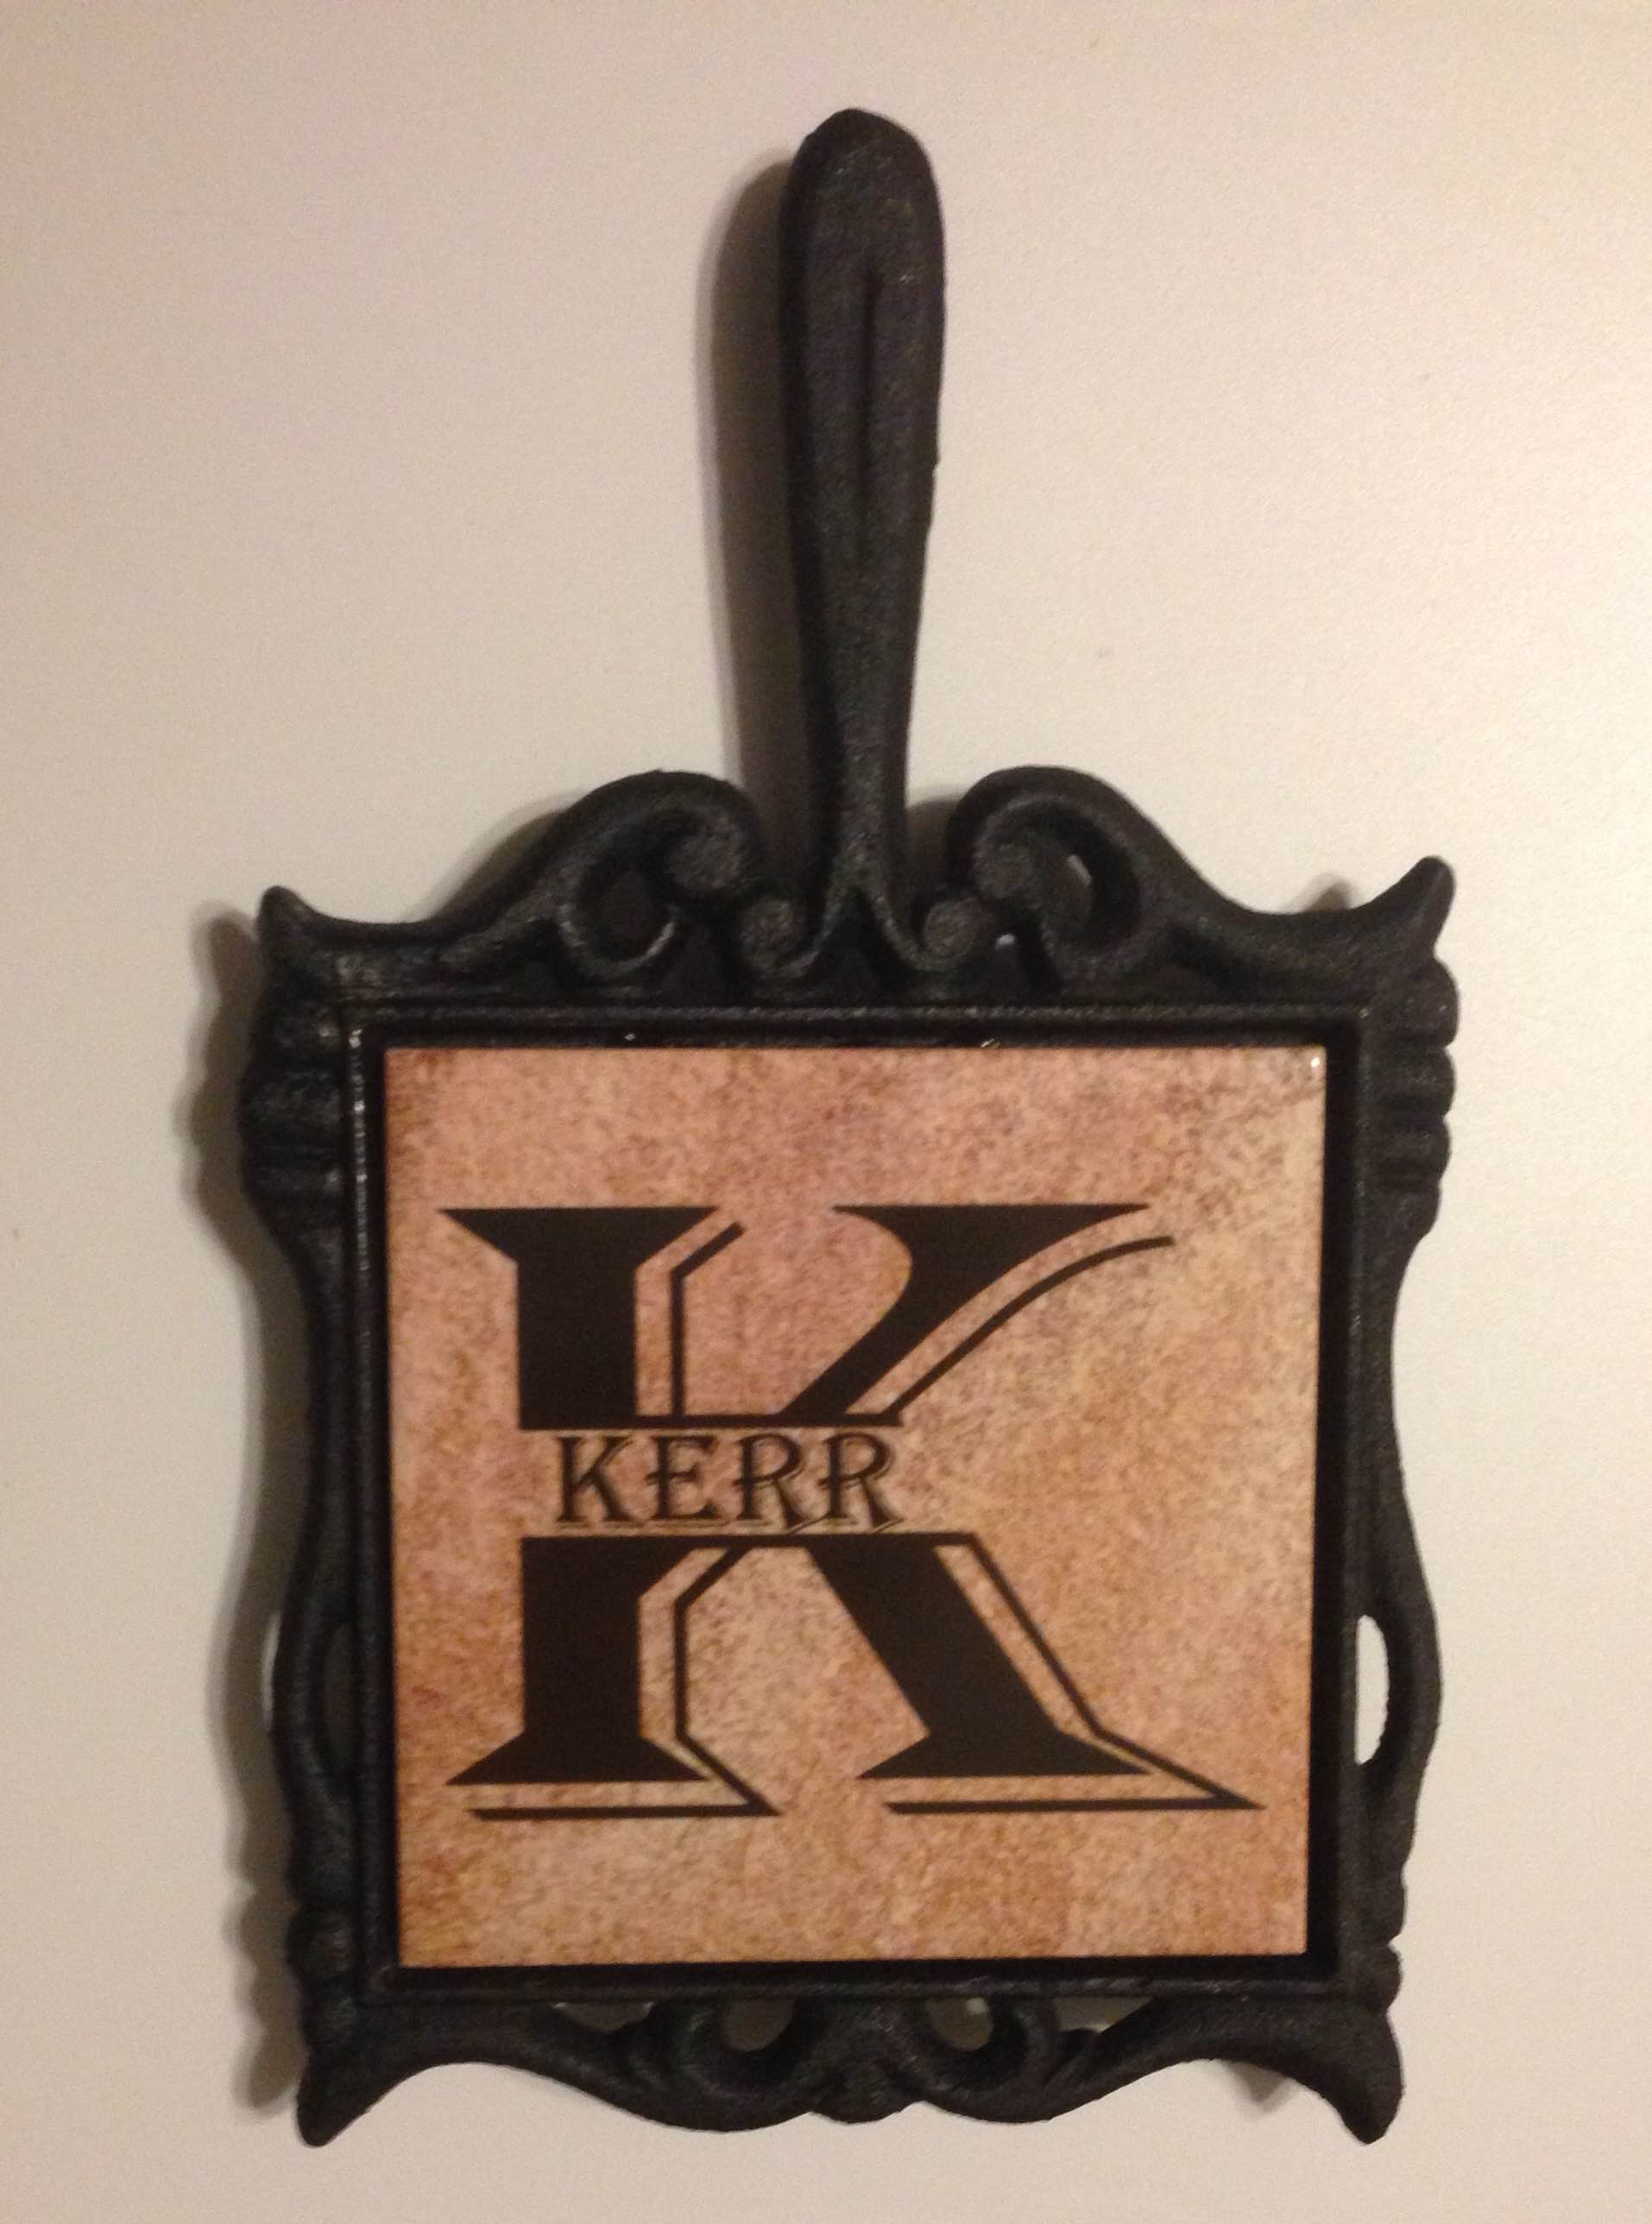 Iron Trivet made with sublimation printing